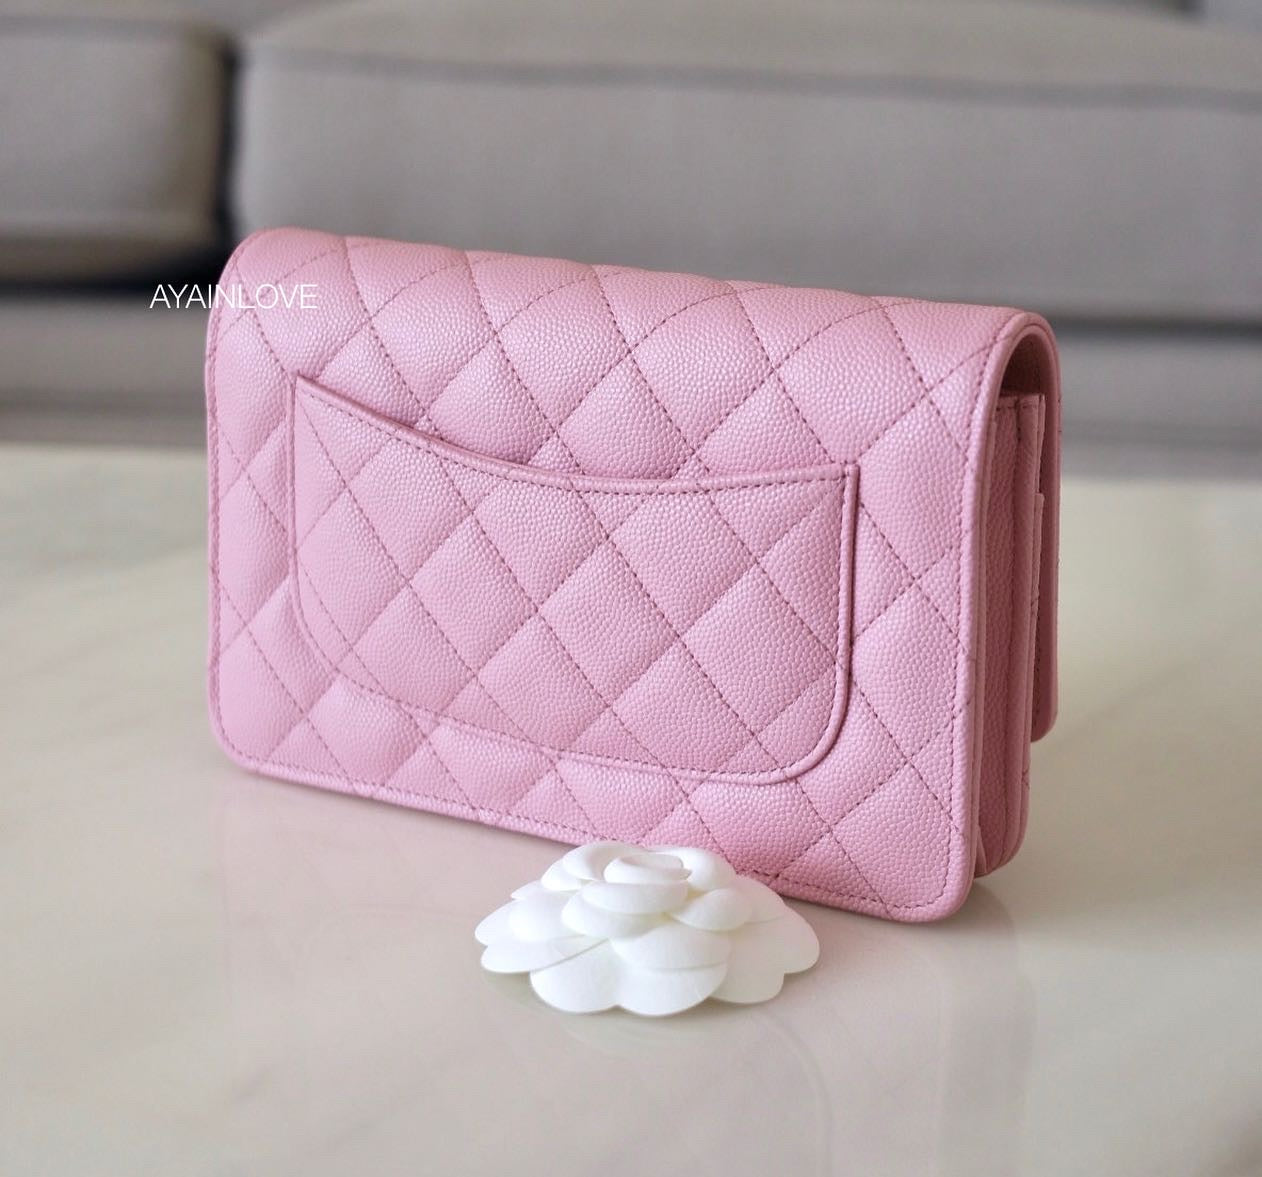 For Sale: ❌ SOLD ❌ Brand New Authentic Chanel 22P Light Pink